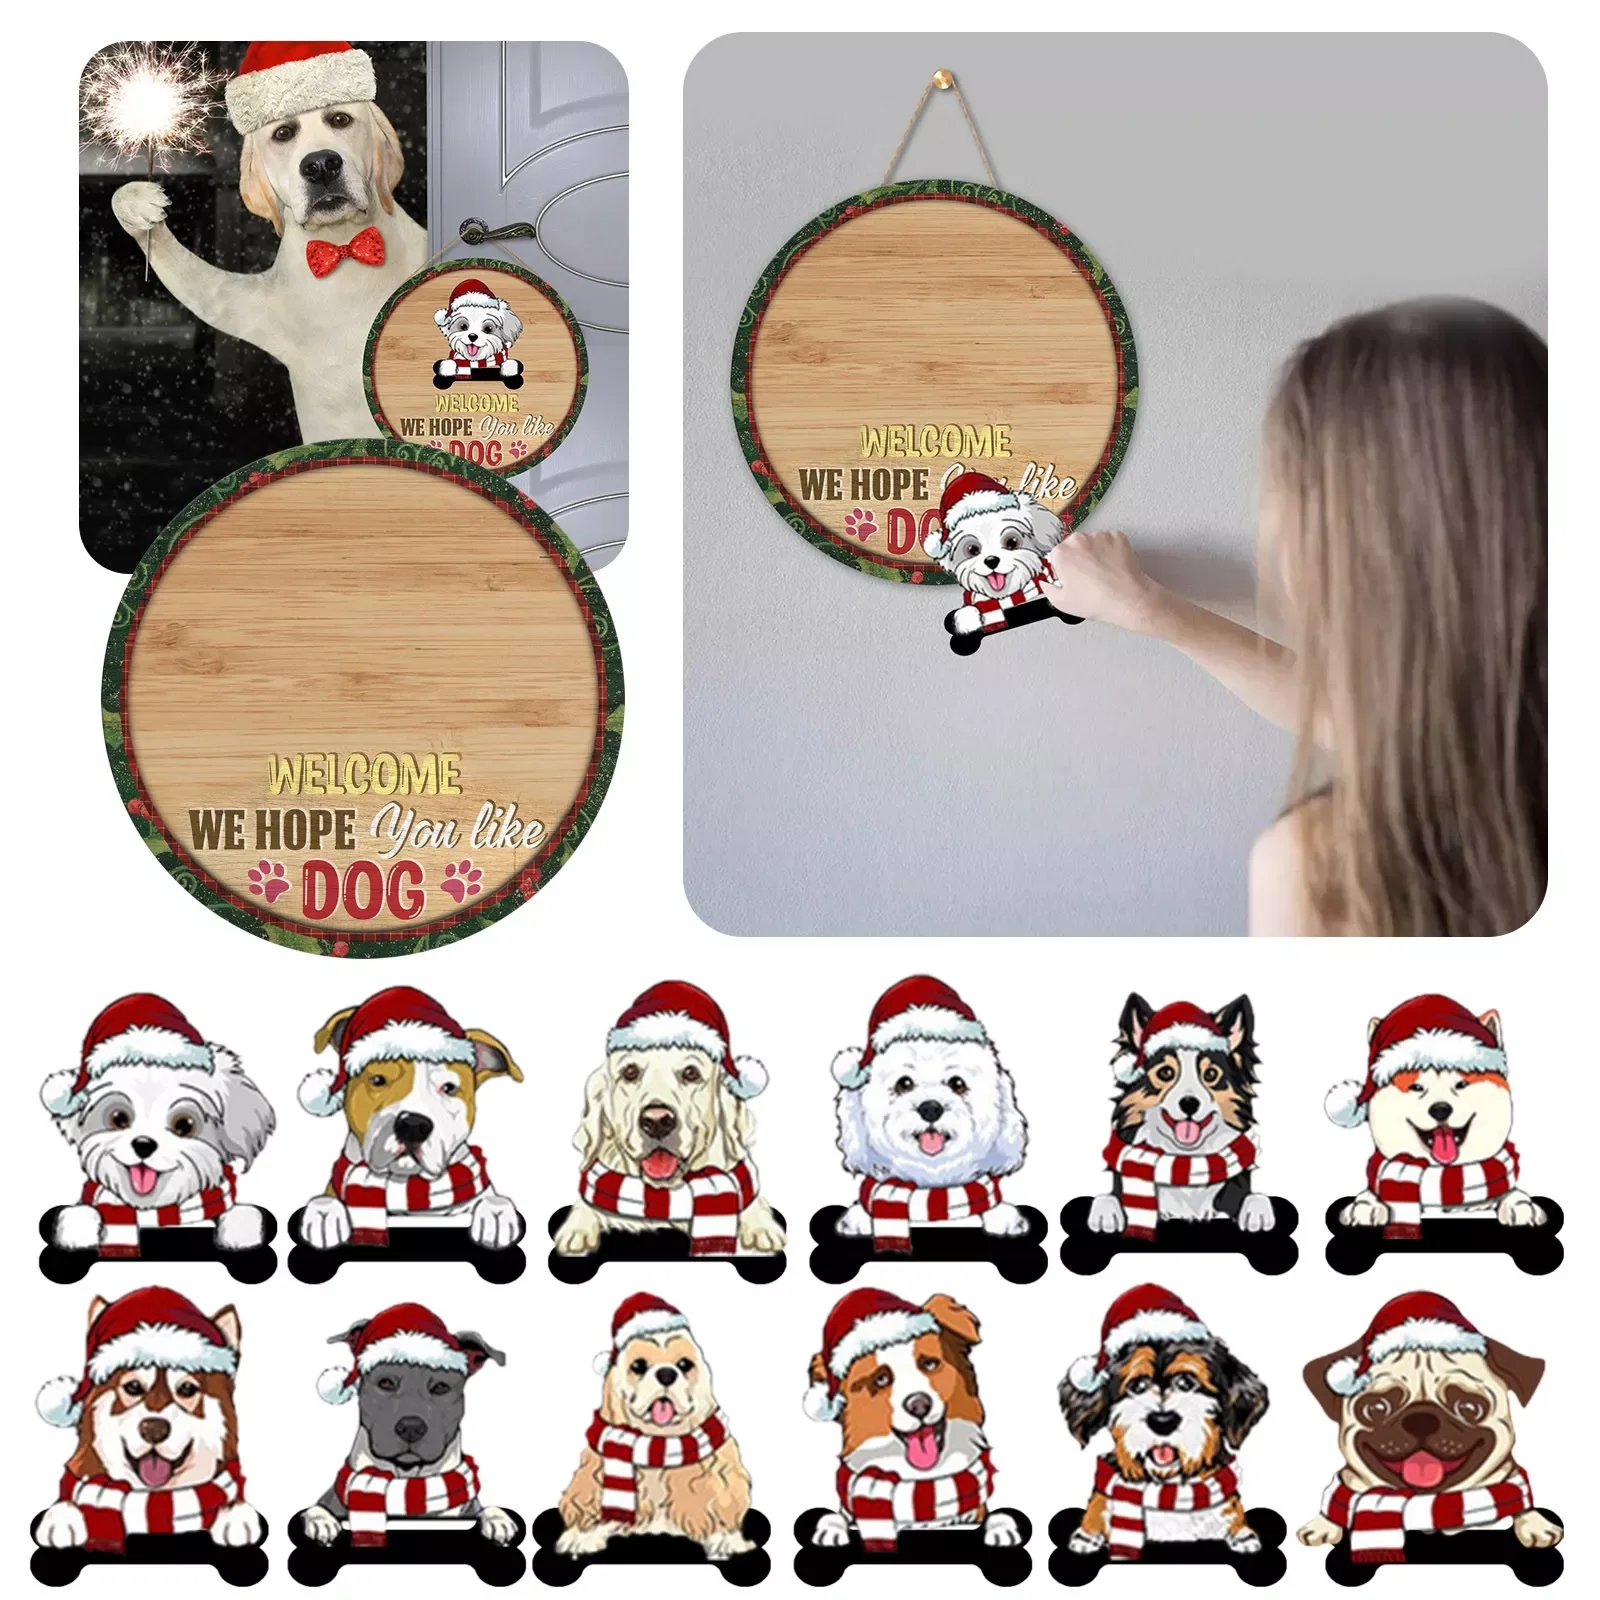 

DIY Interchangeable Dog Clothes A Variety Of Festival Doorplates Are Hung With Signs Light up Wall Decorations for Living Room